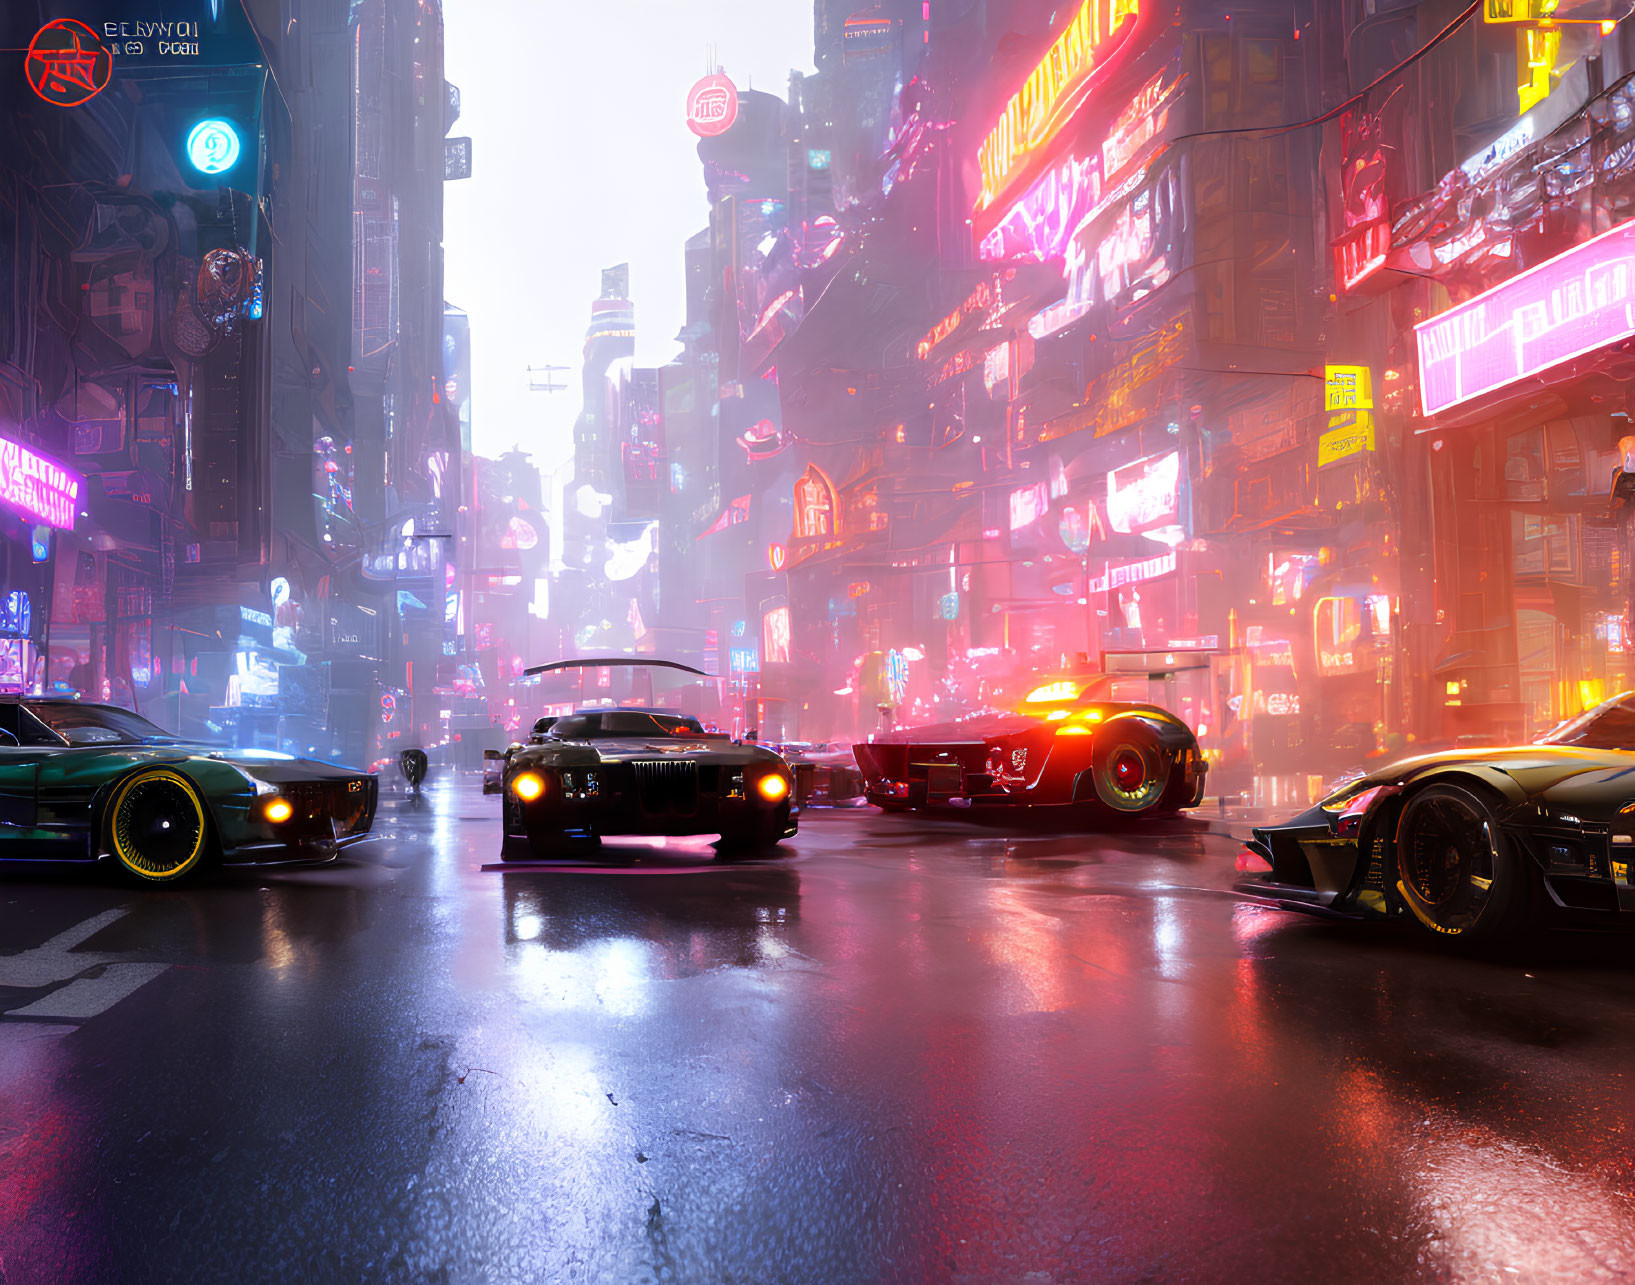 Futuristic city street at night with neon signs and sleek cars